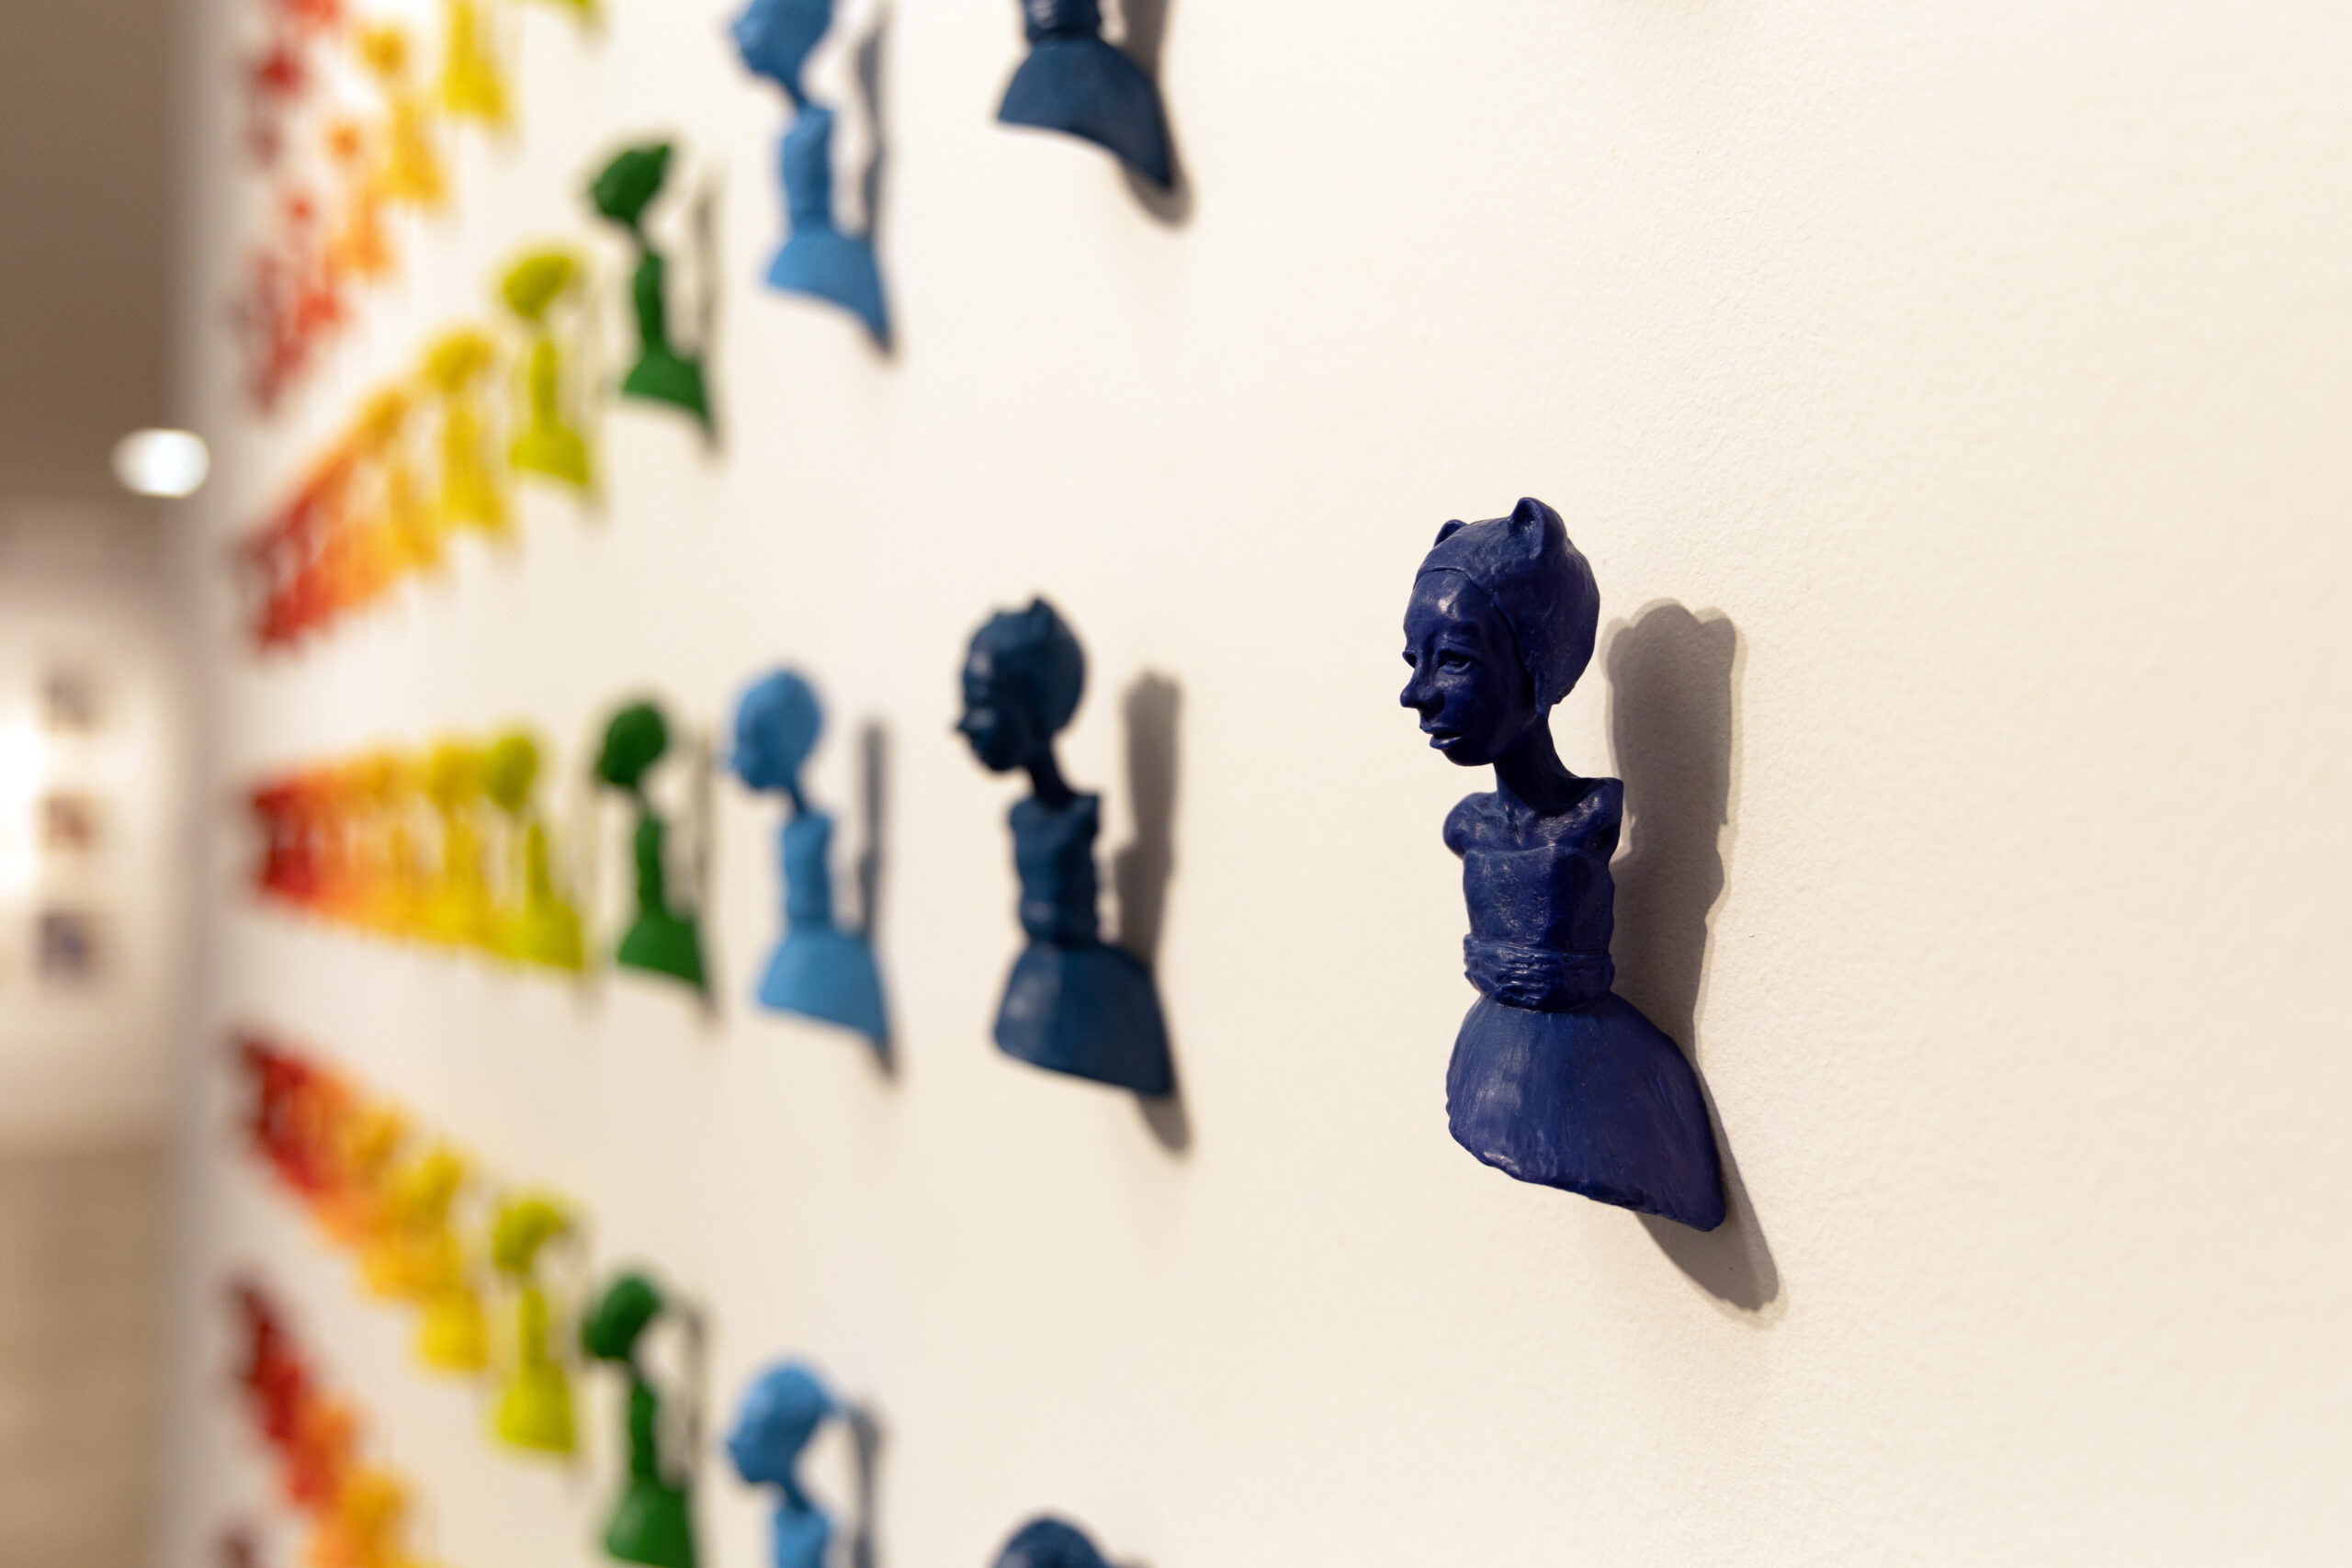 A series of small identical figures of a female form from the hips up are displayed on the wall in horizontal rows.